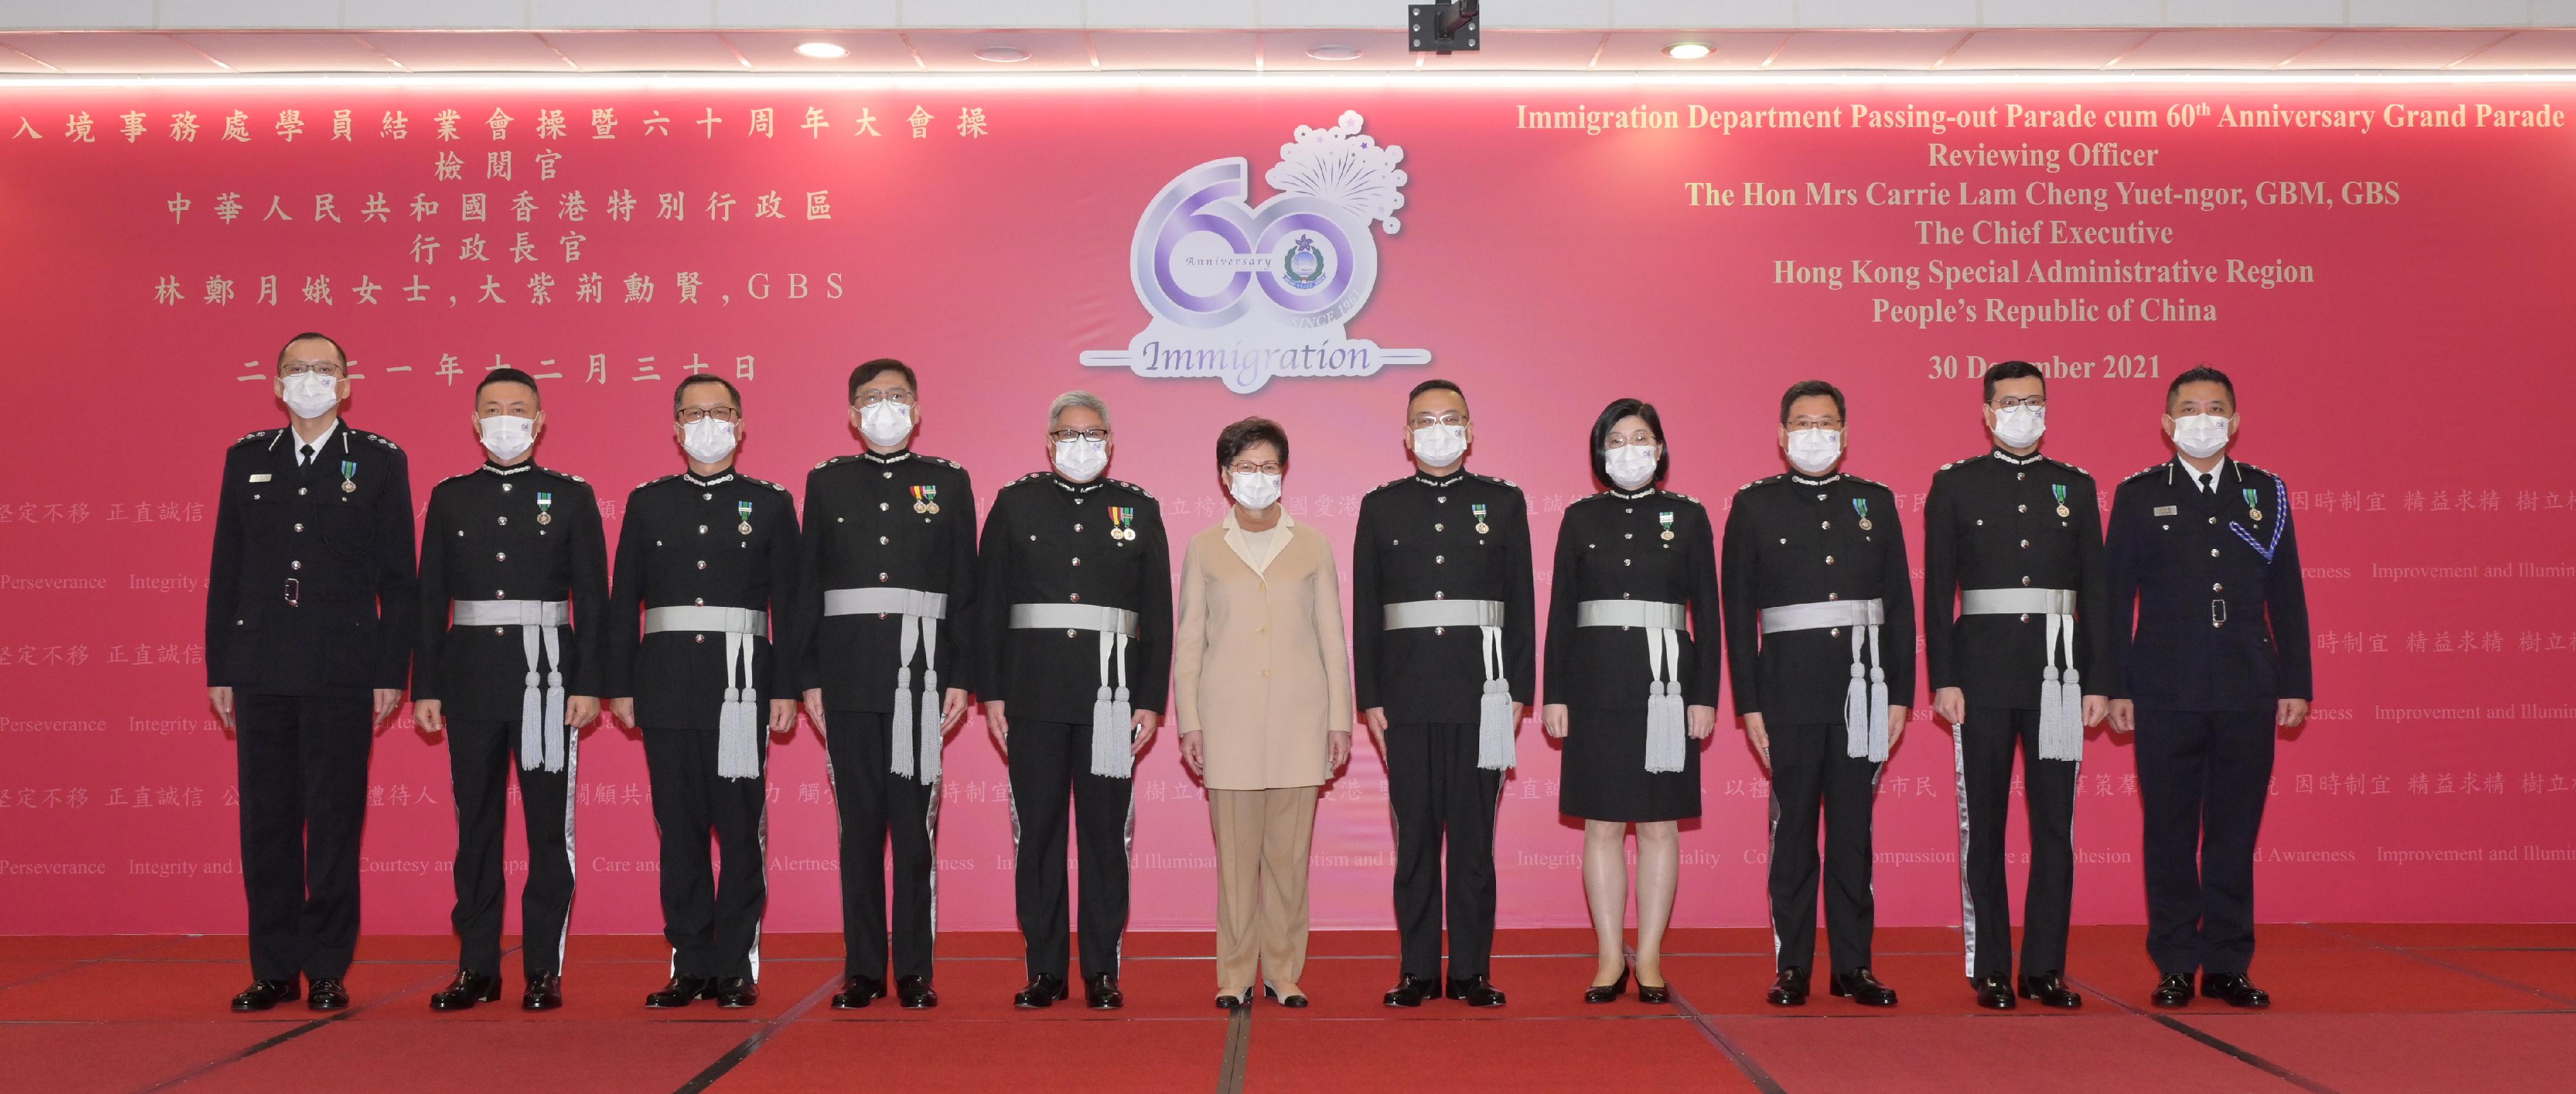 The Immigration Department Passing-out Parade cum 60th Anniversary Grand Parade was held today (December 30). Photo shows the Chief Executive, Mrs Carrie Lam (sixth right), taking a photo with the directorate grade officers of the Immigration Department after the parade.